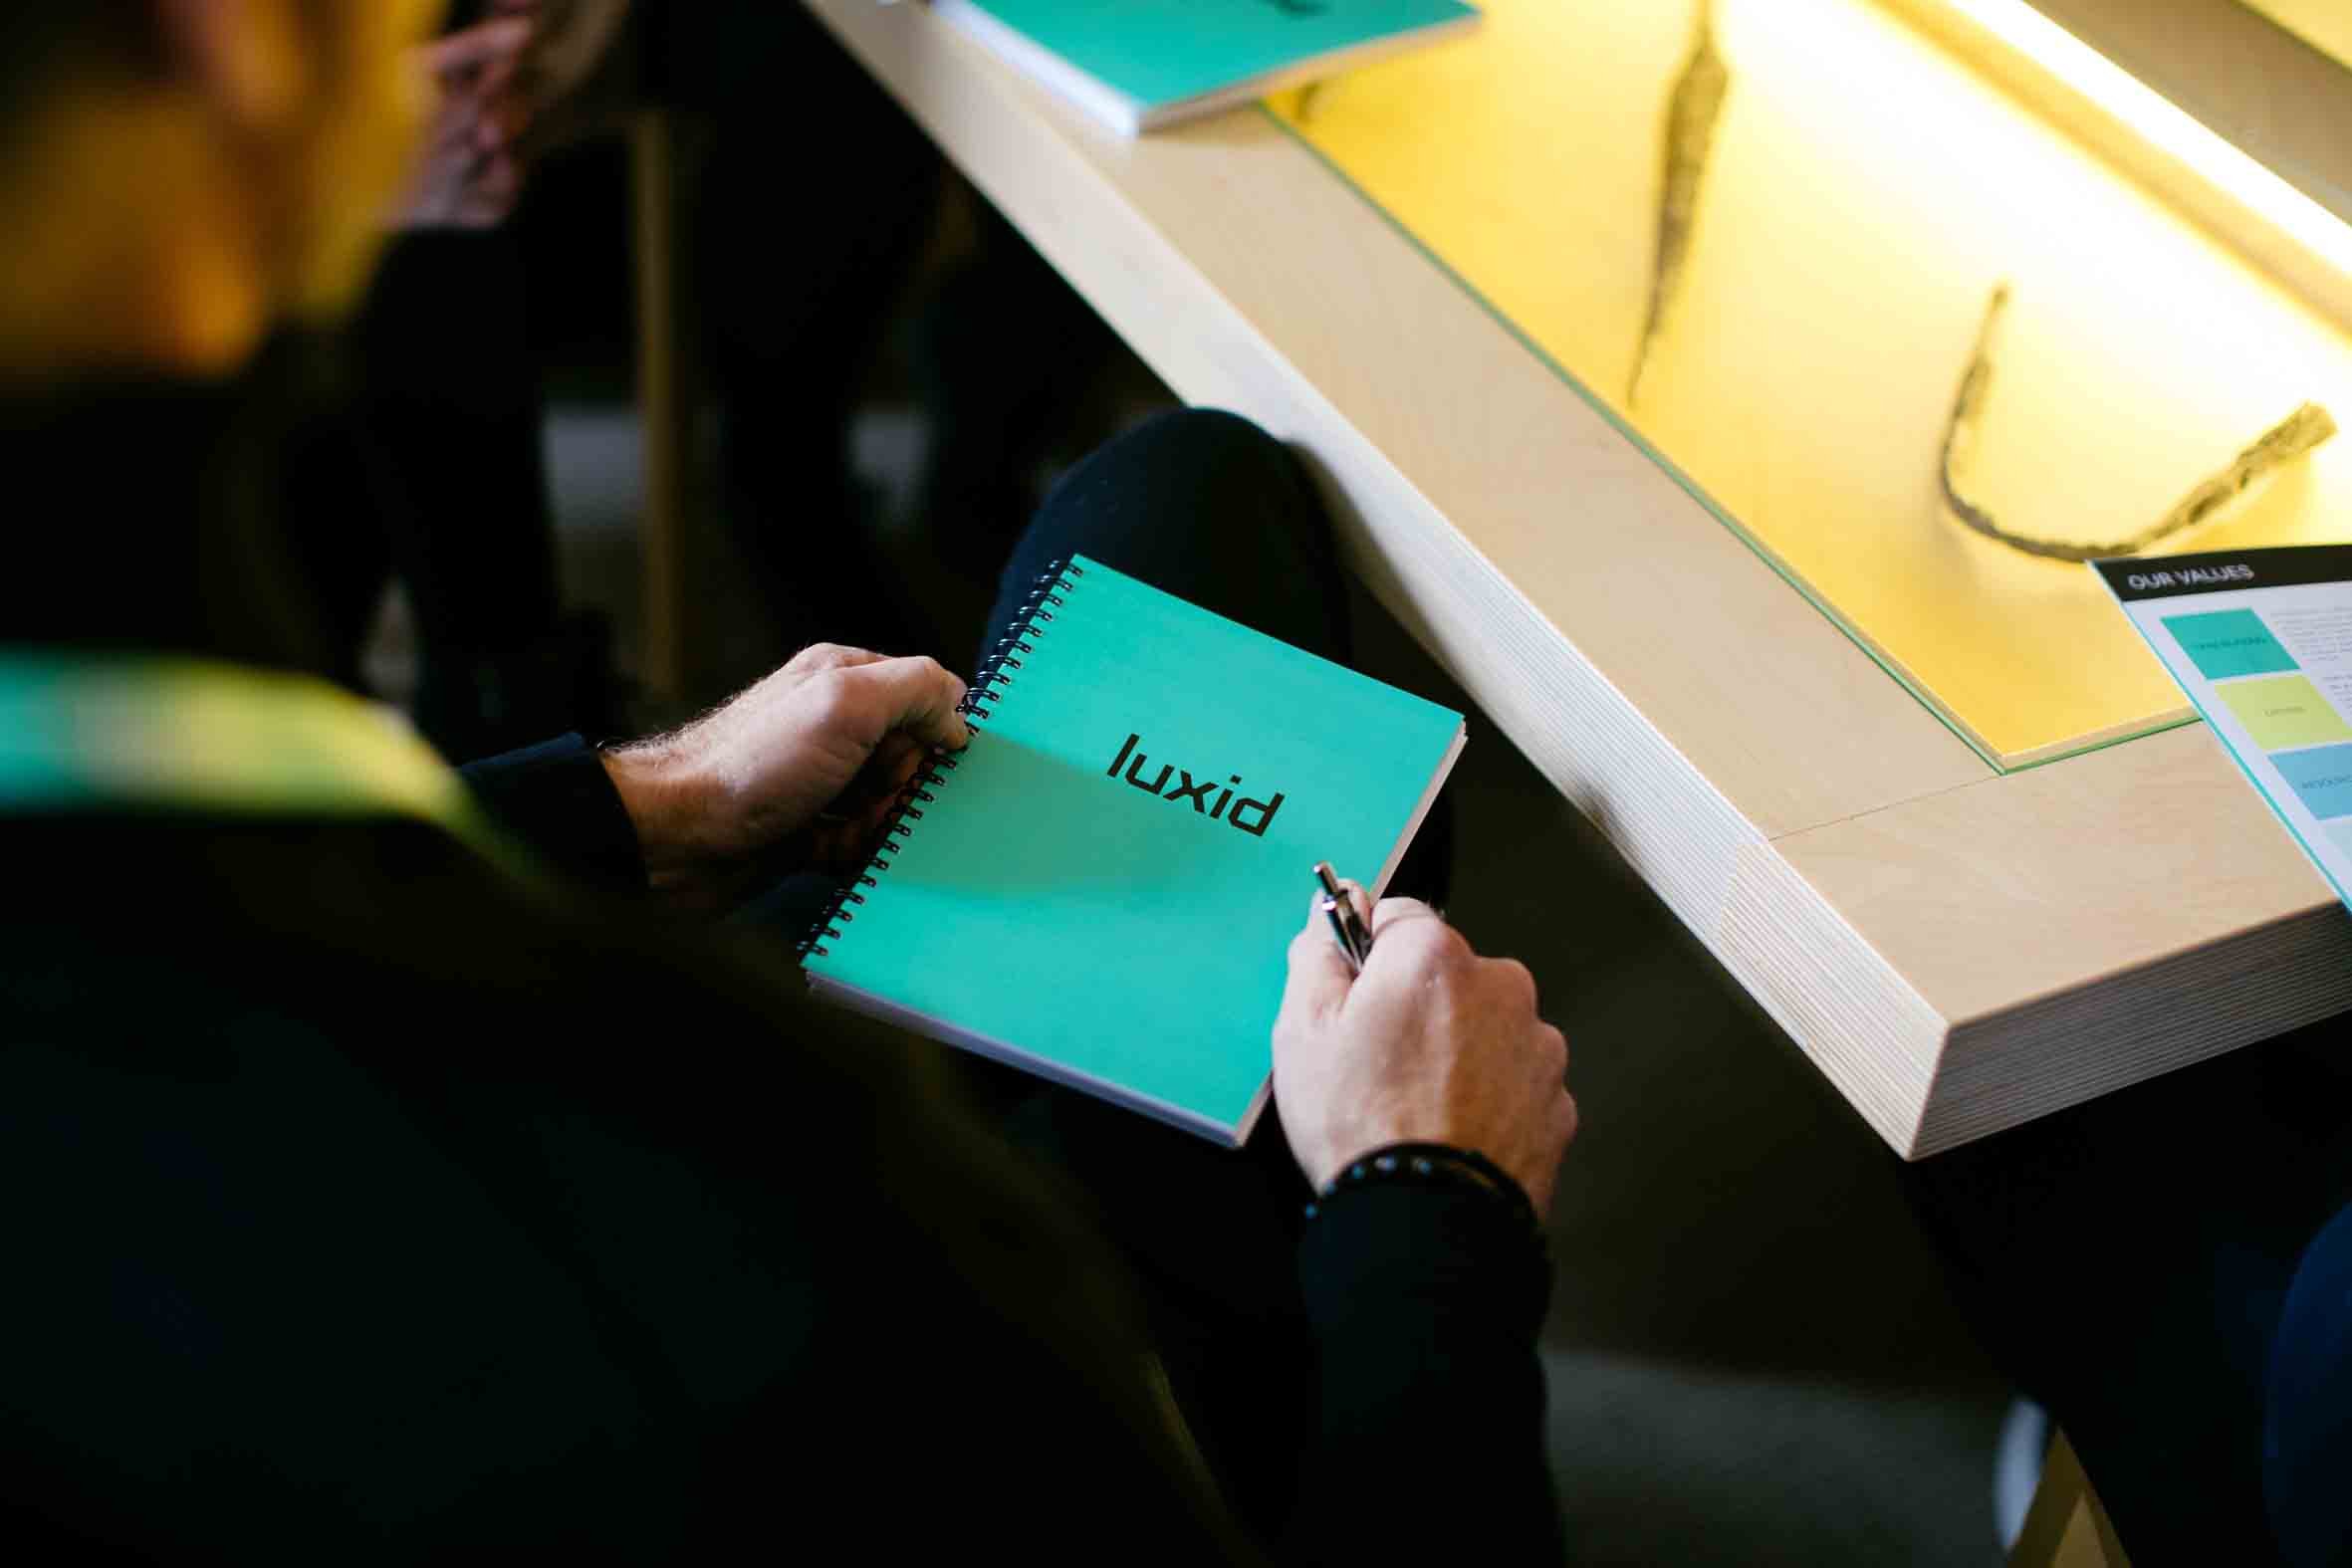 luxid-notebook-in-hand